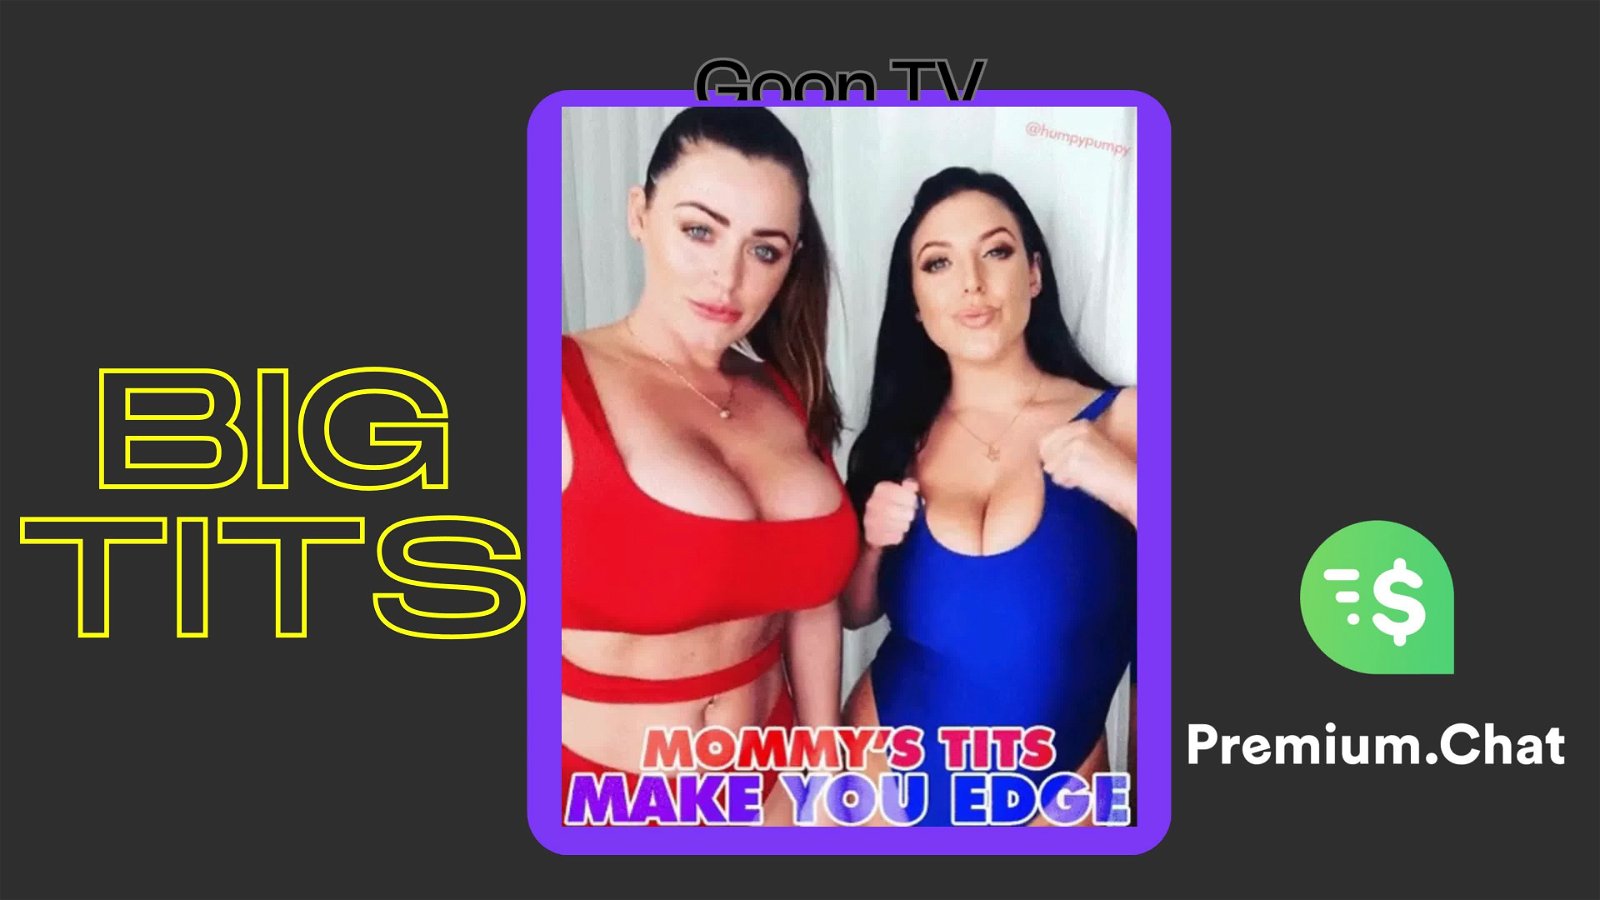 Watch the Video by Premium.Chat with the username @premiumchatapp, who is a brand user, posted on March 1, 2024 and the text says 'Edge to... BIG BREASTS CHAT on Premium.Chat

https://premium.chat/discover/nsfw-adult/big-breasts

Surrender to the allure of our Big Breasts chat, an enticing realm where the fascination and admiration for full, voluptuous busts are celebrated and..'